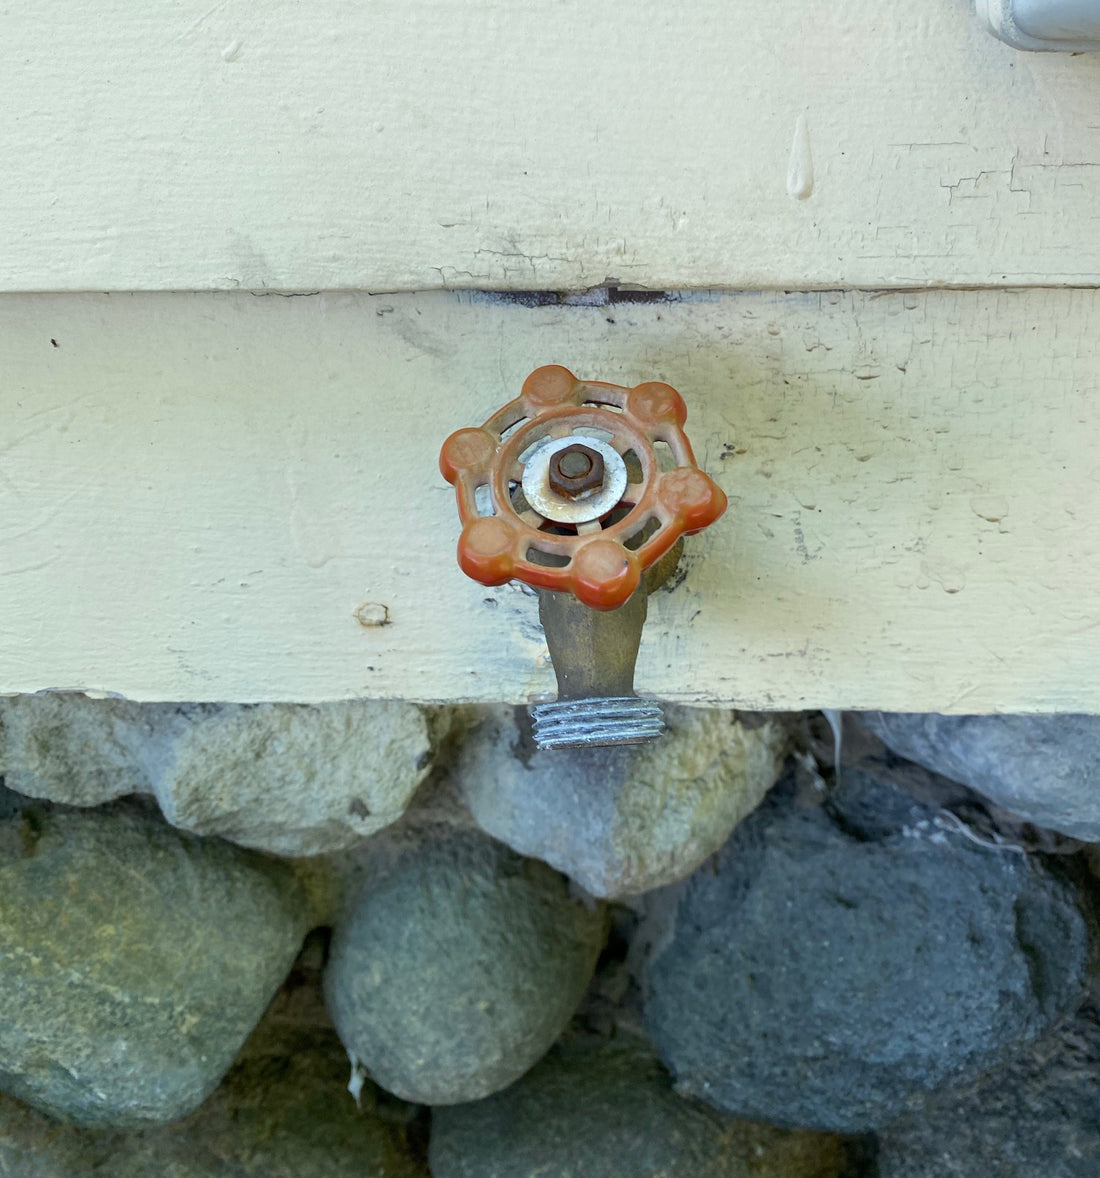 How to prevent mold growth in your home: swap out old brass spigots.